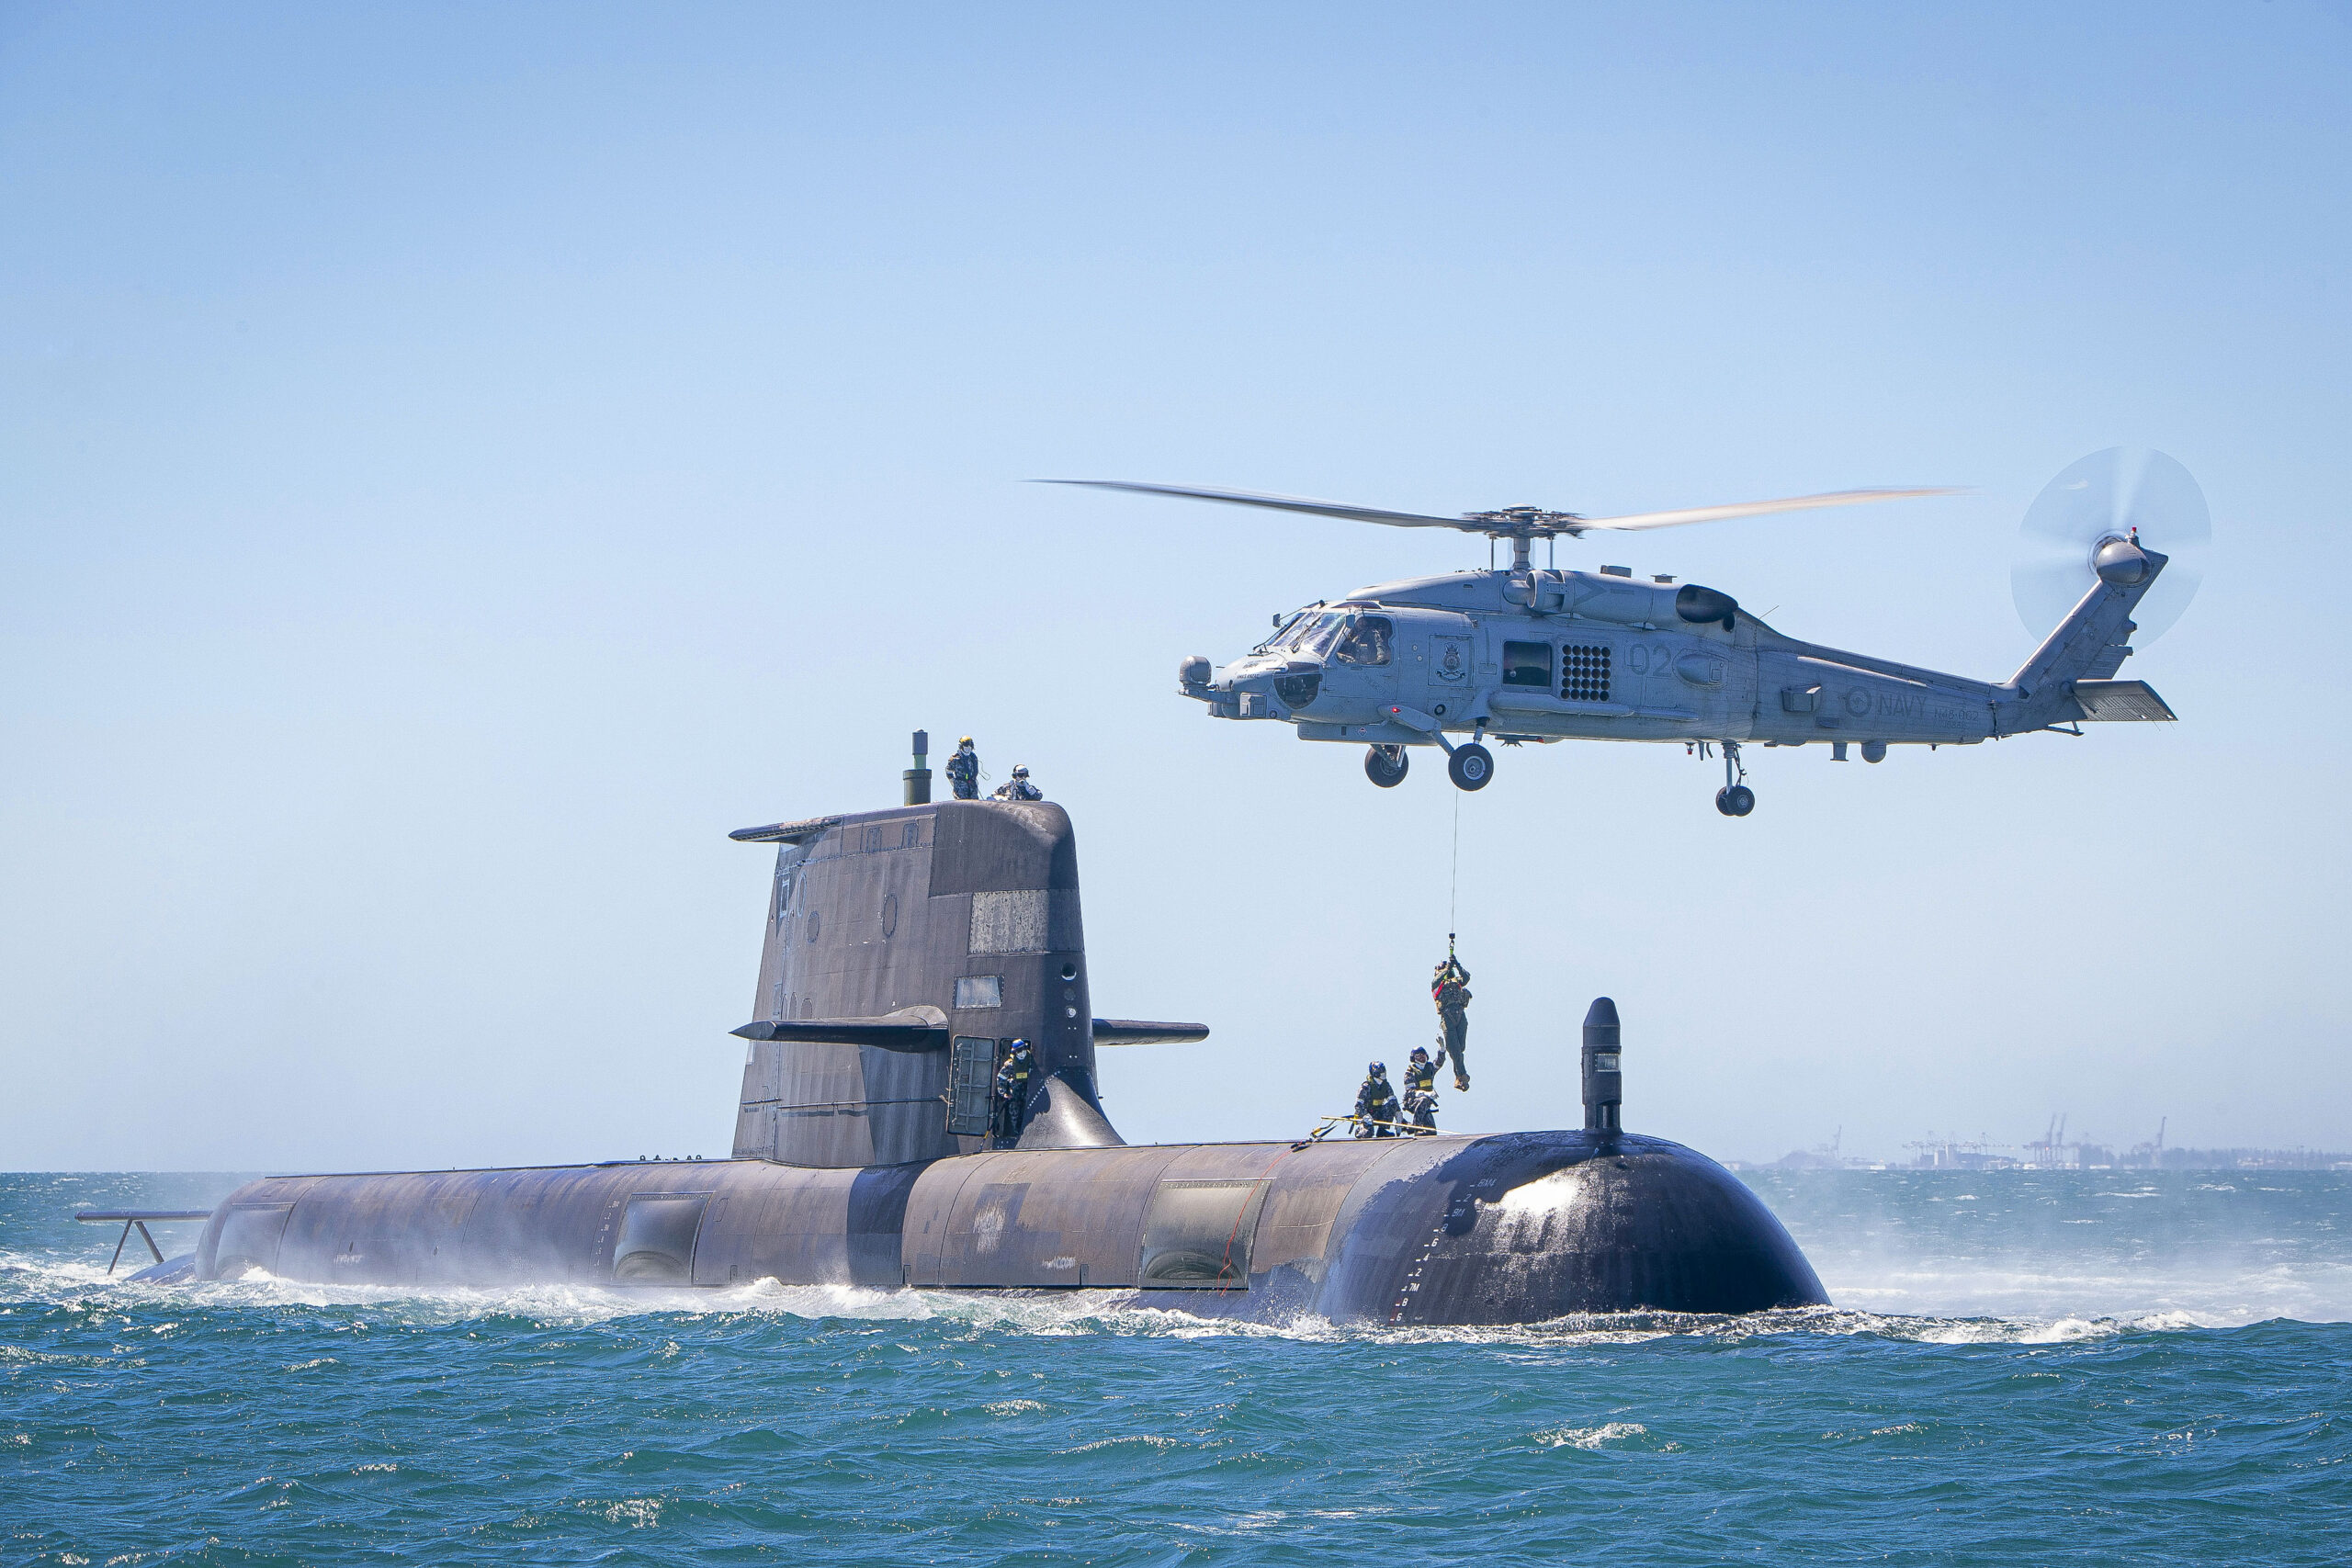 The <em>Collins</em> class submarine HMAS <em>Rankin</em> conducts helicopter transfers in Cockburn Sound, Western Australia, as part of training assessments to ensure the boat is ready to deploy. <em>Australian Department of Defense</em>